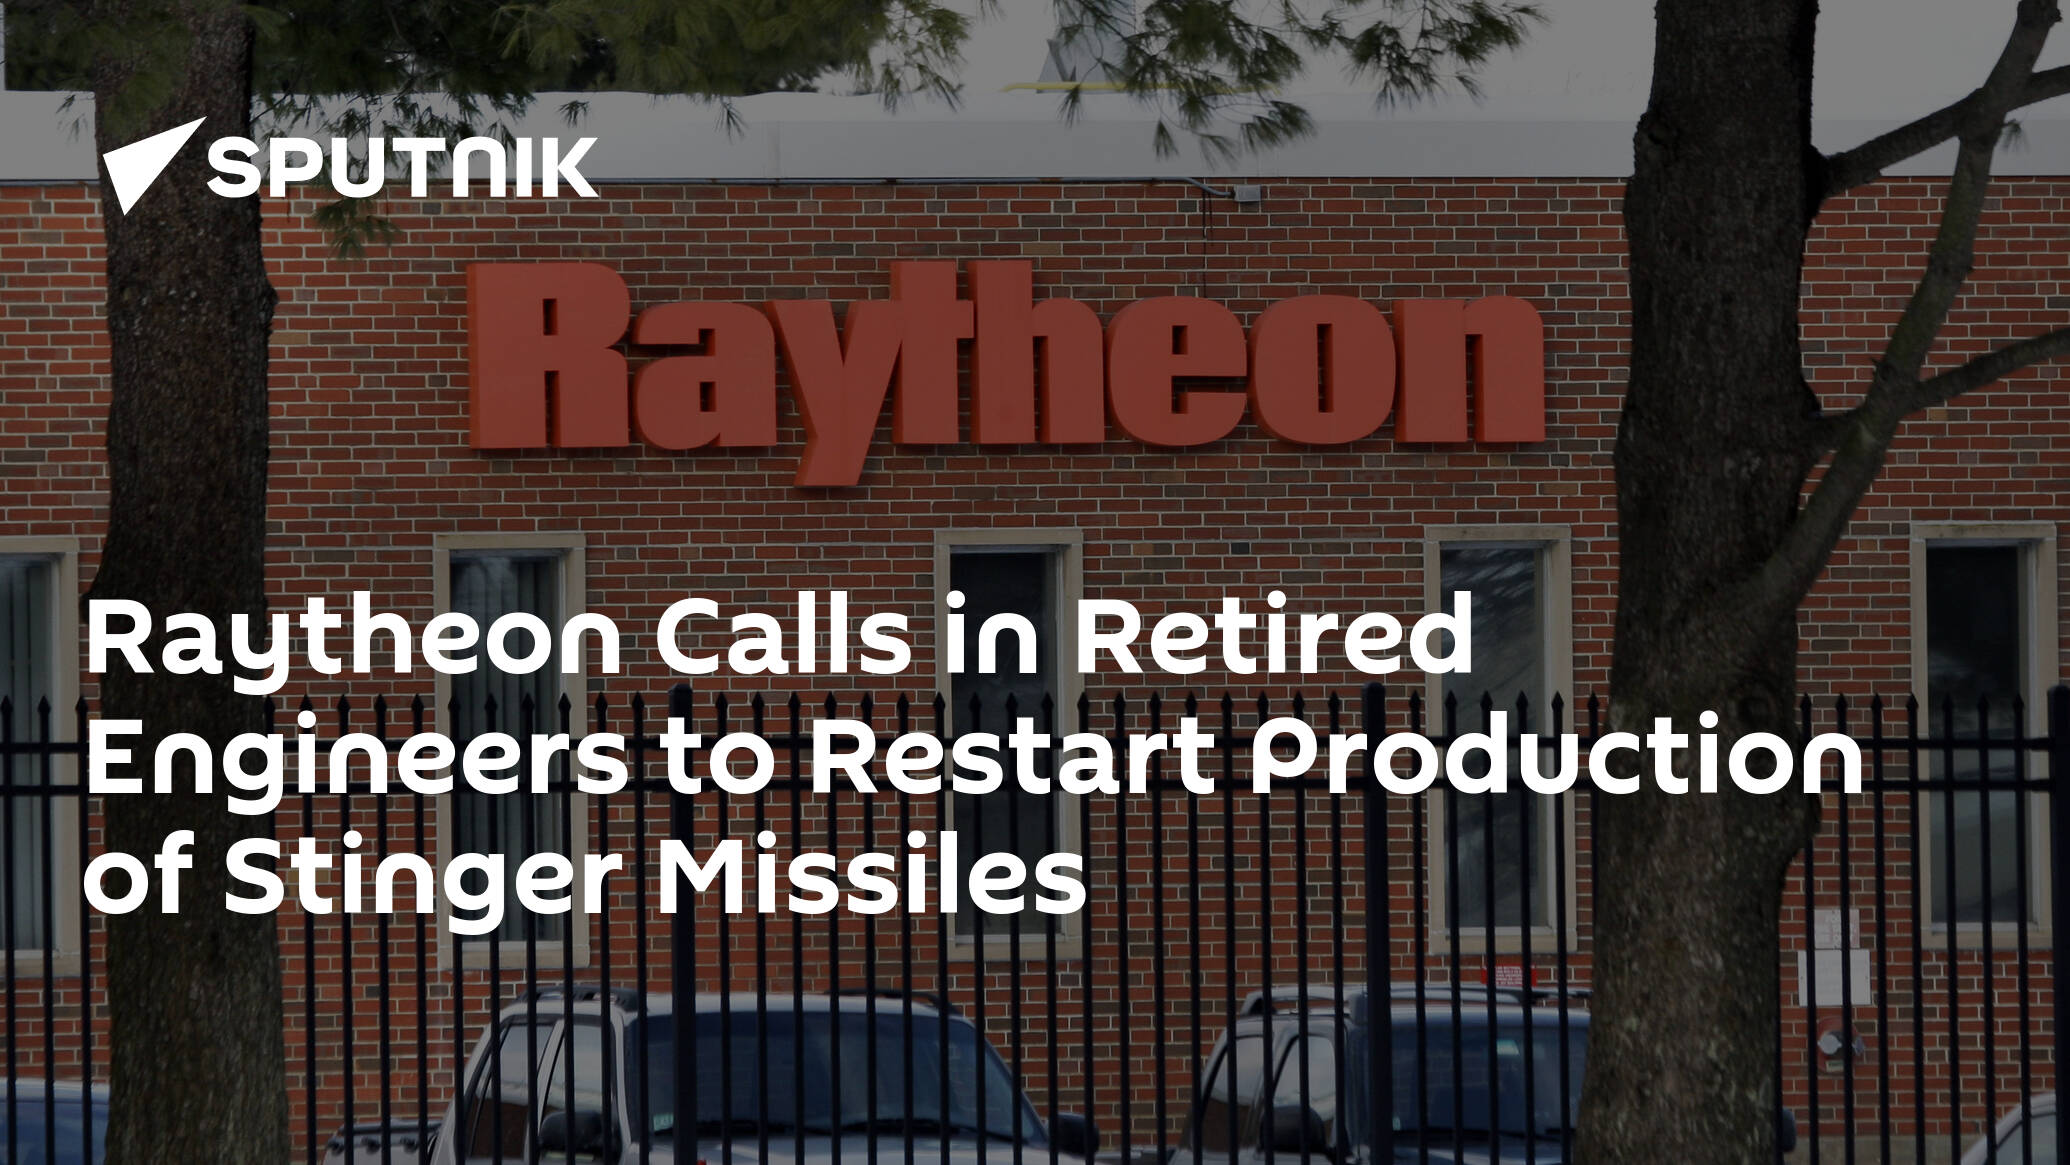 Raytheon Calls in Retired Engineers to Restart Production of Stinger Missiles